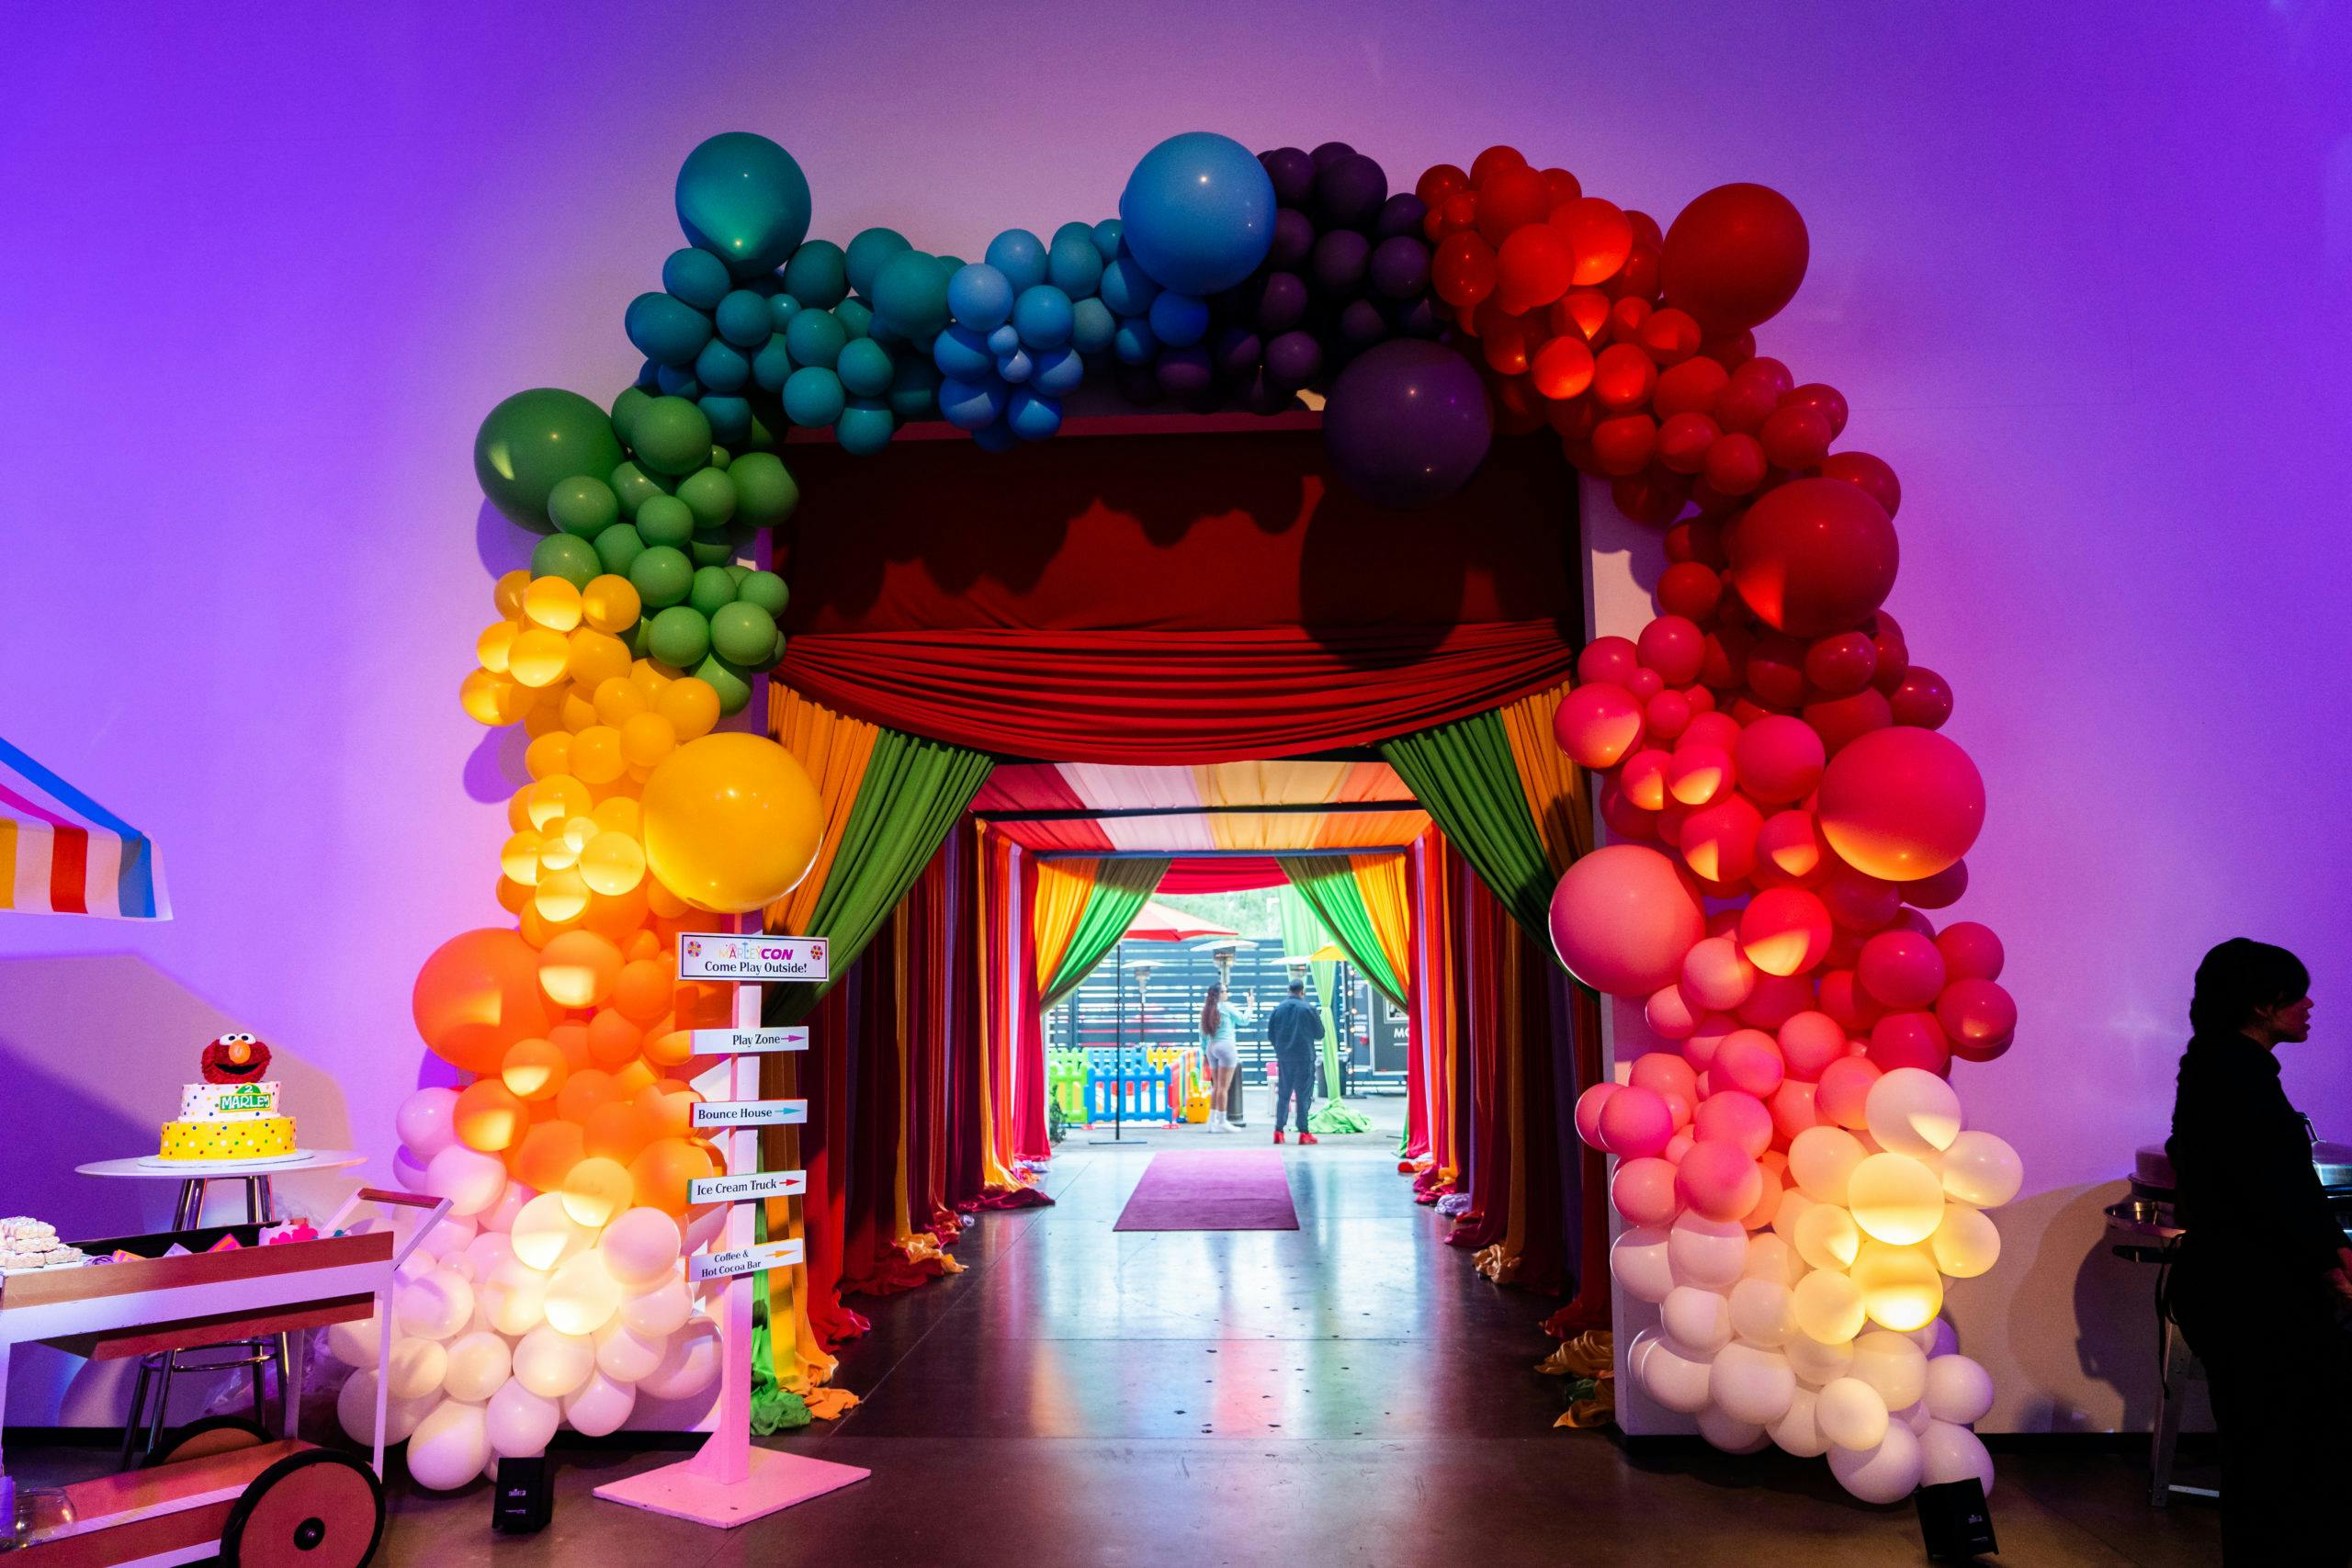 Marley Con Kids 2nd Birthday Party at AV Irvine in Irvine, CA with Colorful Balloon Arch Entrance | PartySlate